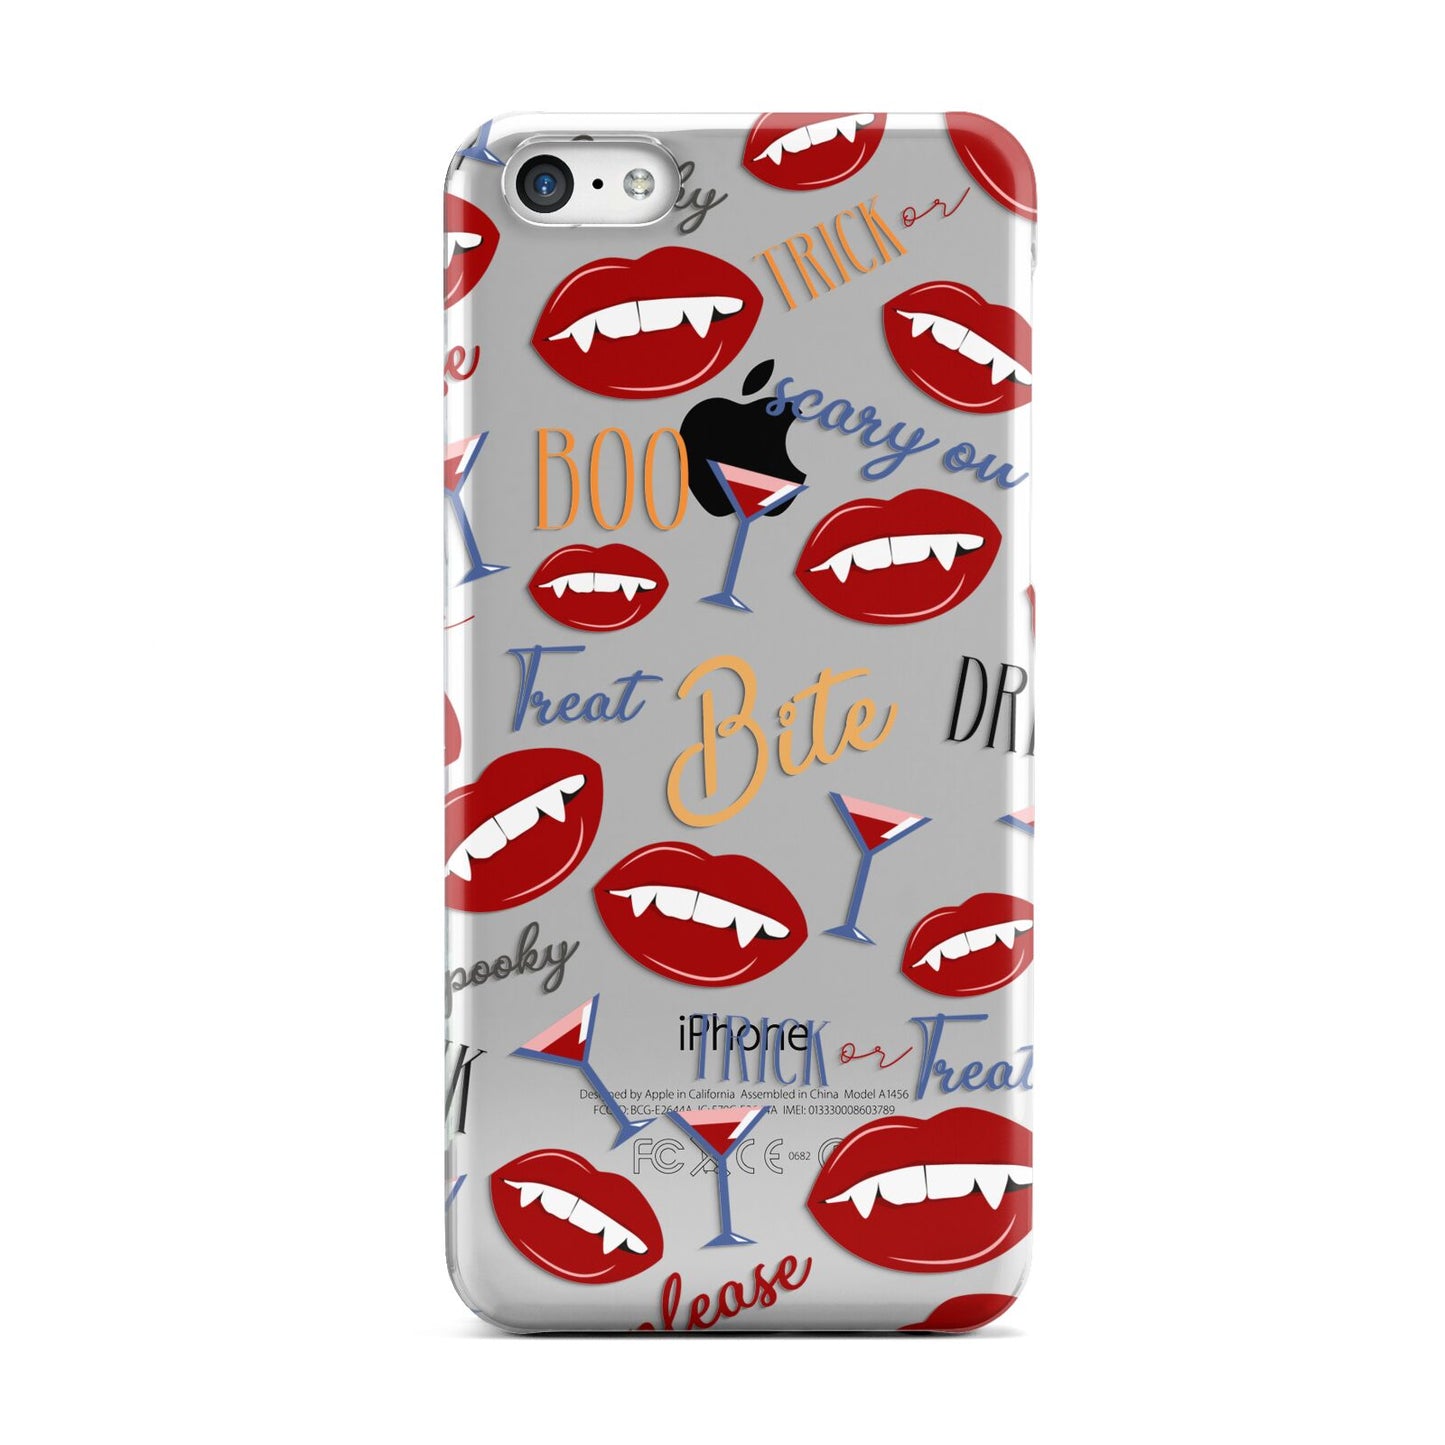 Vampire Illustrations and Catchphrases Apple iPhone 5c Case